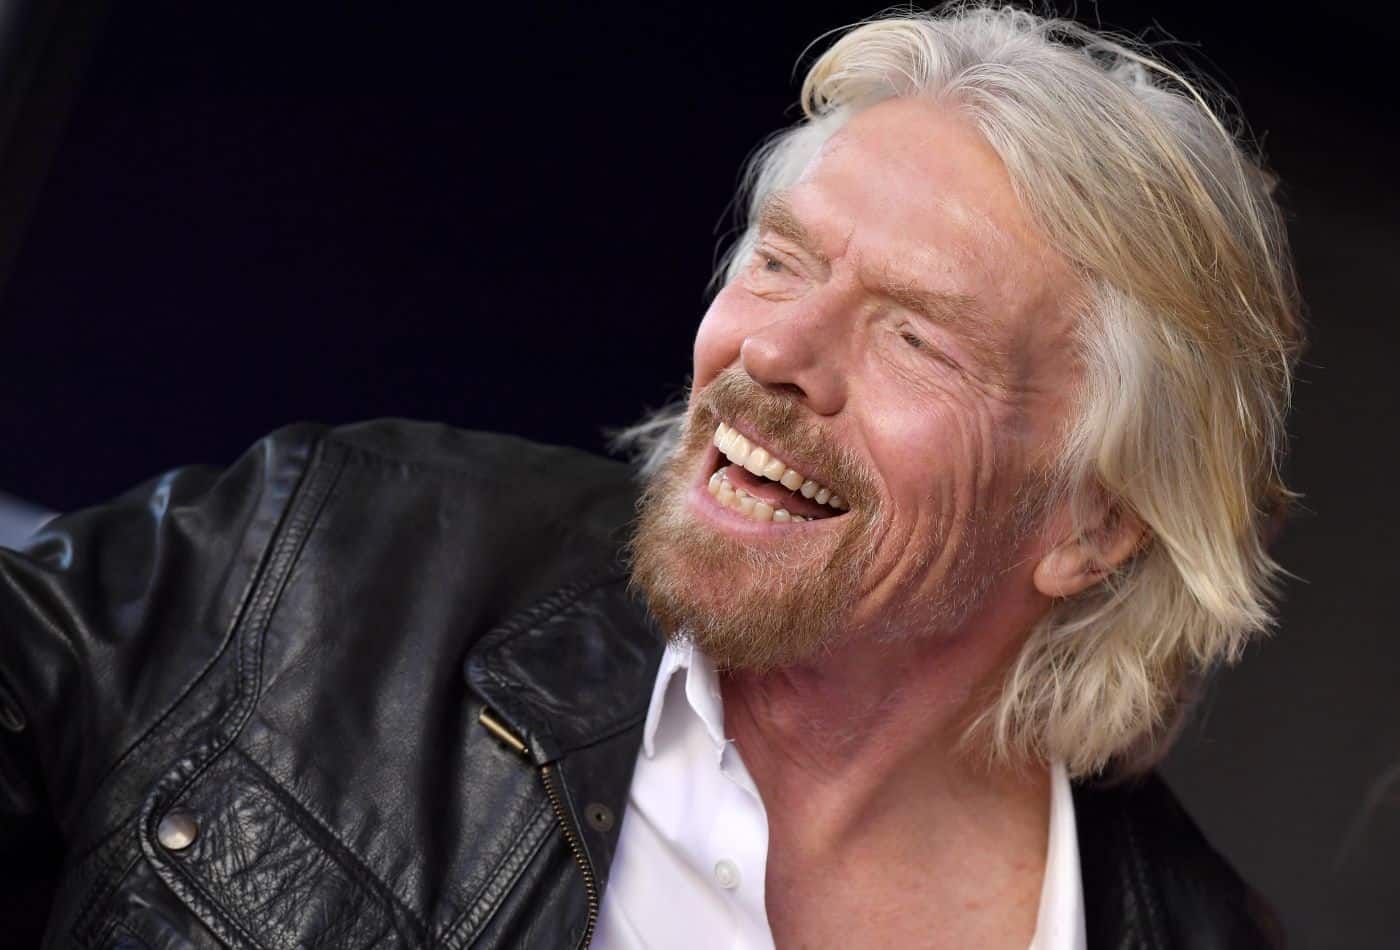 10 Most Successful Entrepreneurs (And What to Learn from Them)